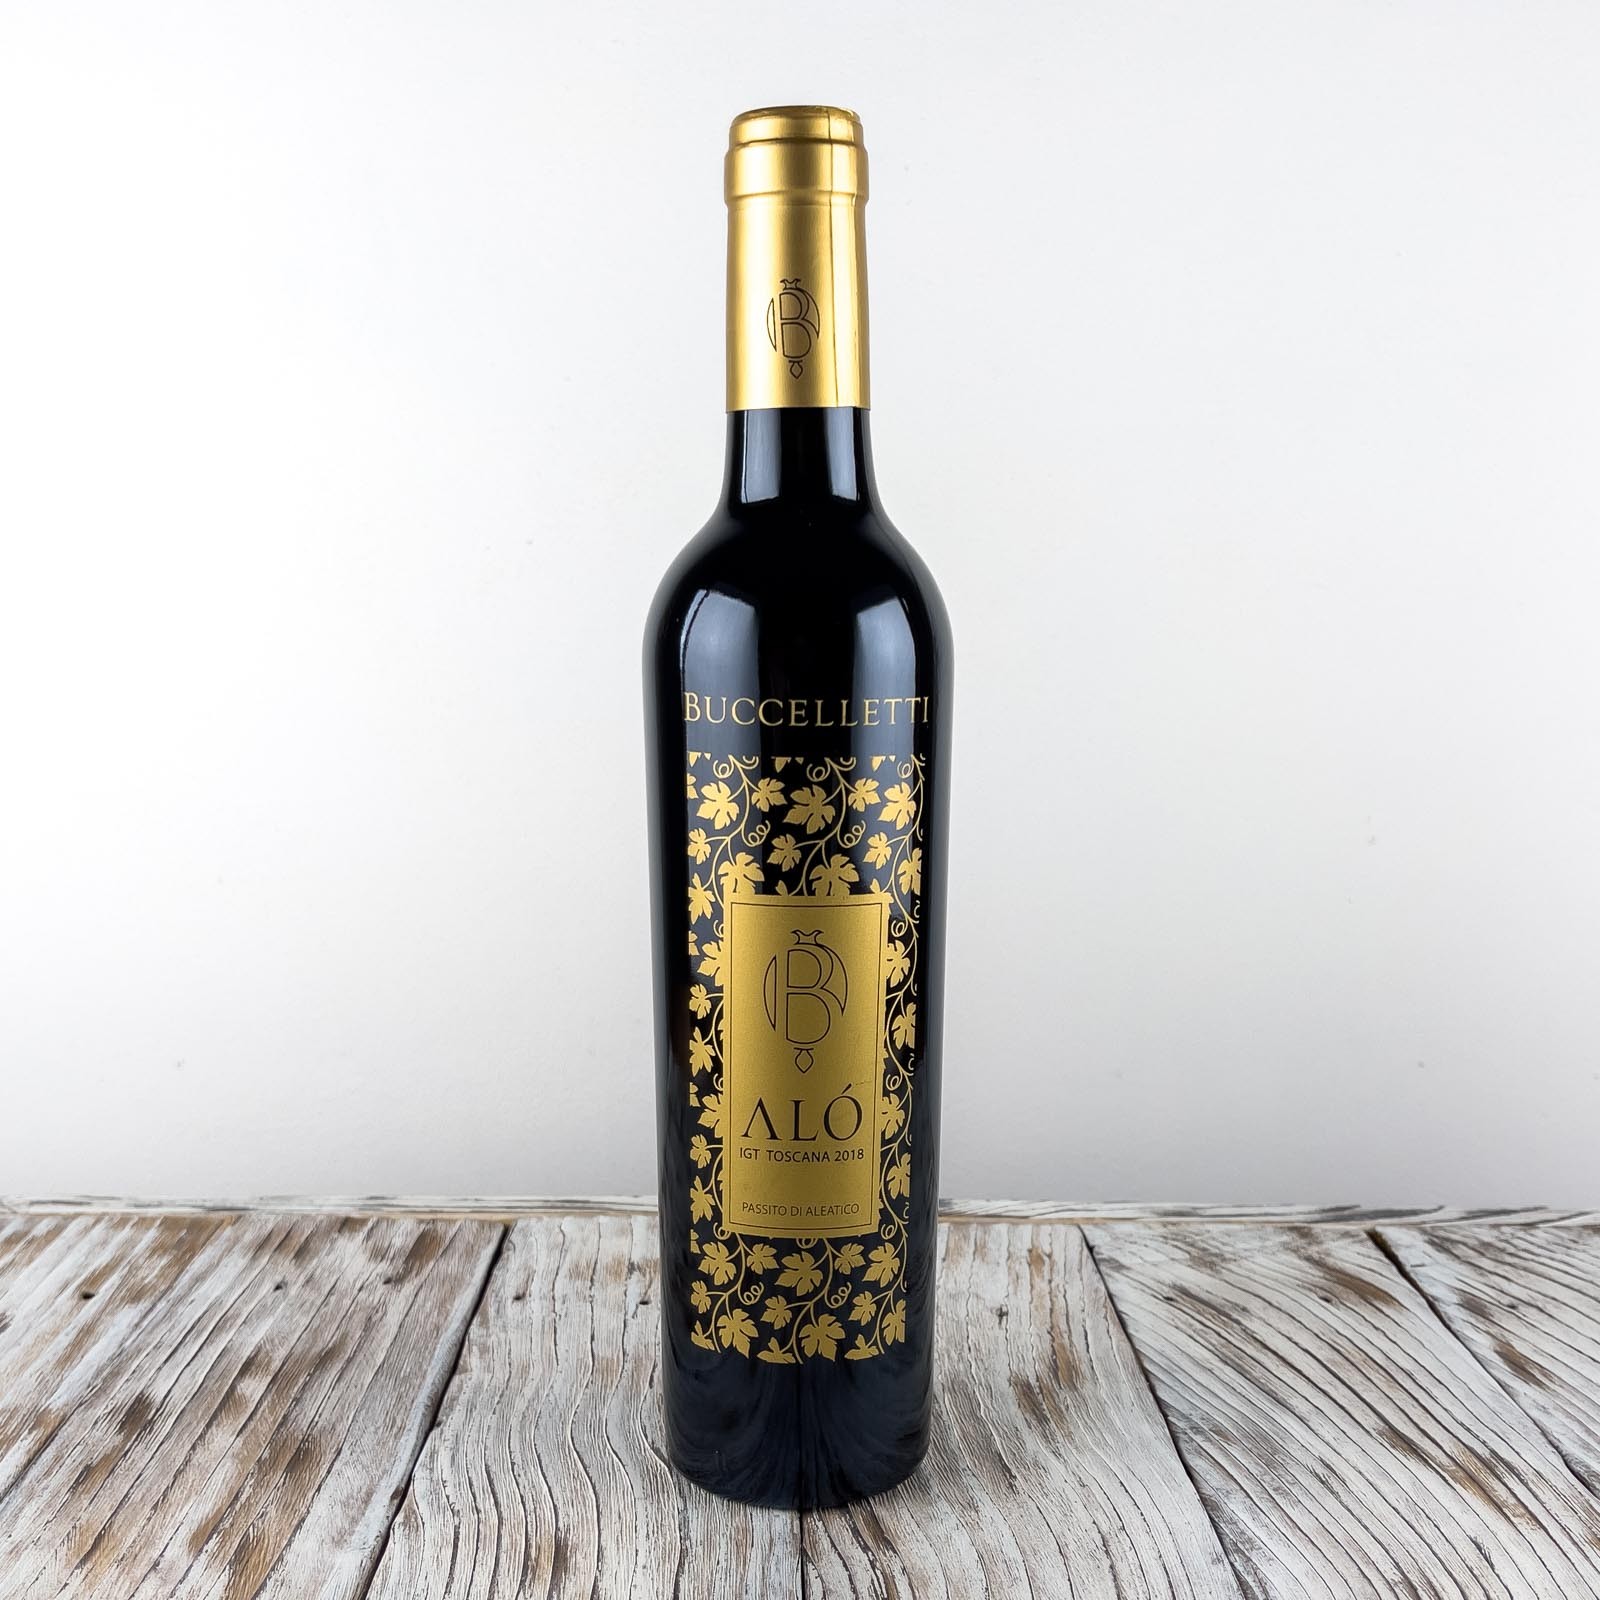 “Alò” di Buccelletti is a fruity tuscan passito wine with a full flavor.